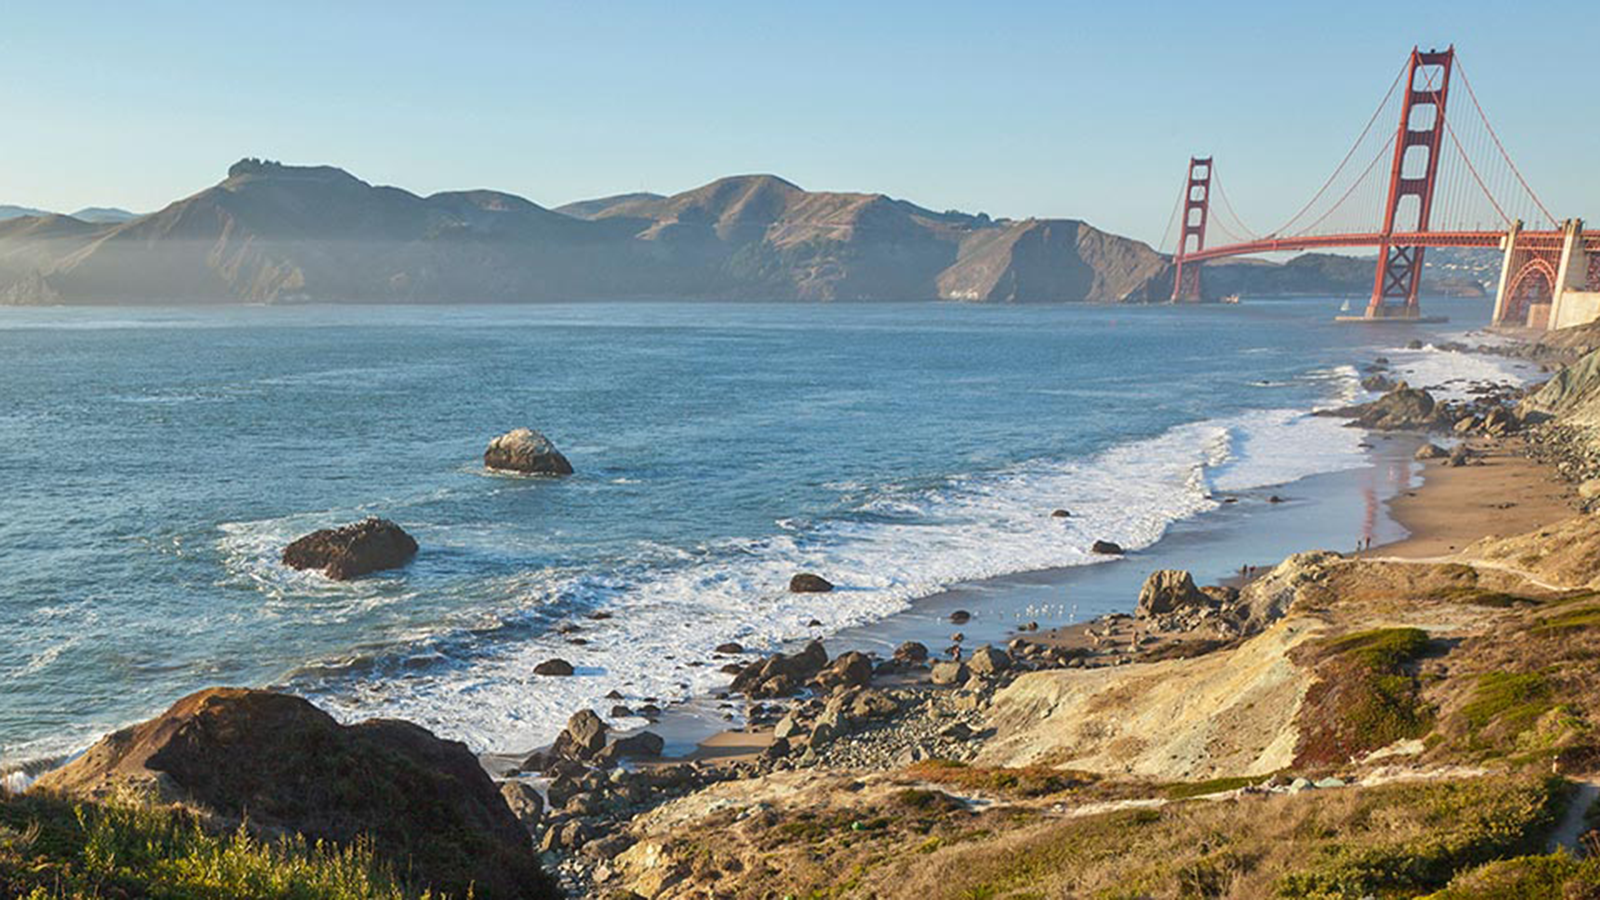 Explore The Walt Disney Family Museum, the Palace of Fine Arts, and Crissy Field in the surrounding Presidio of San Francisco.